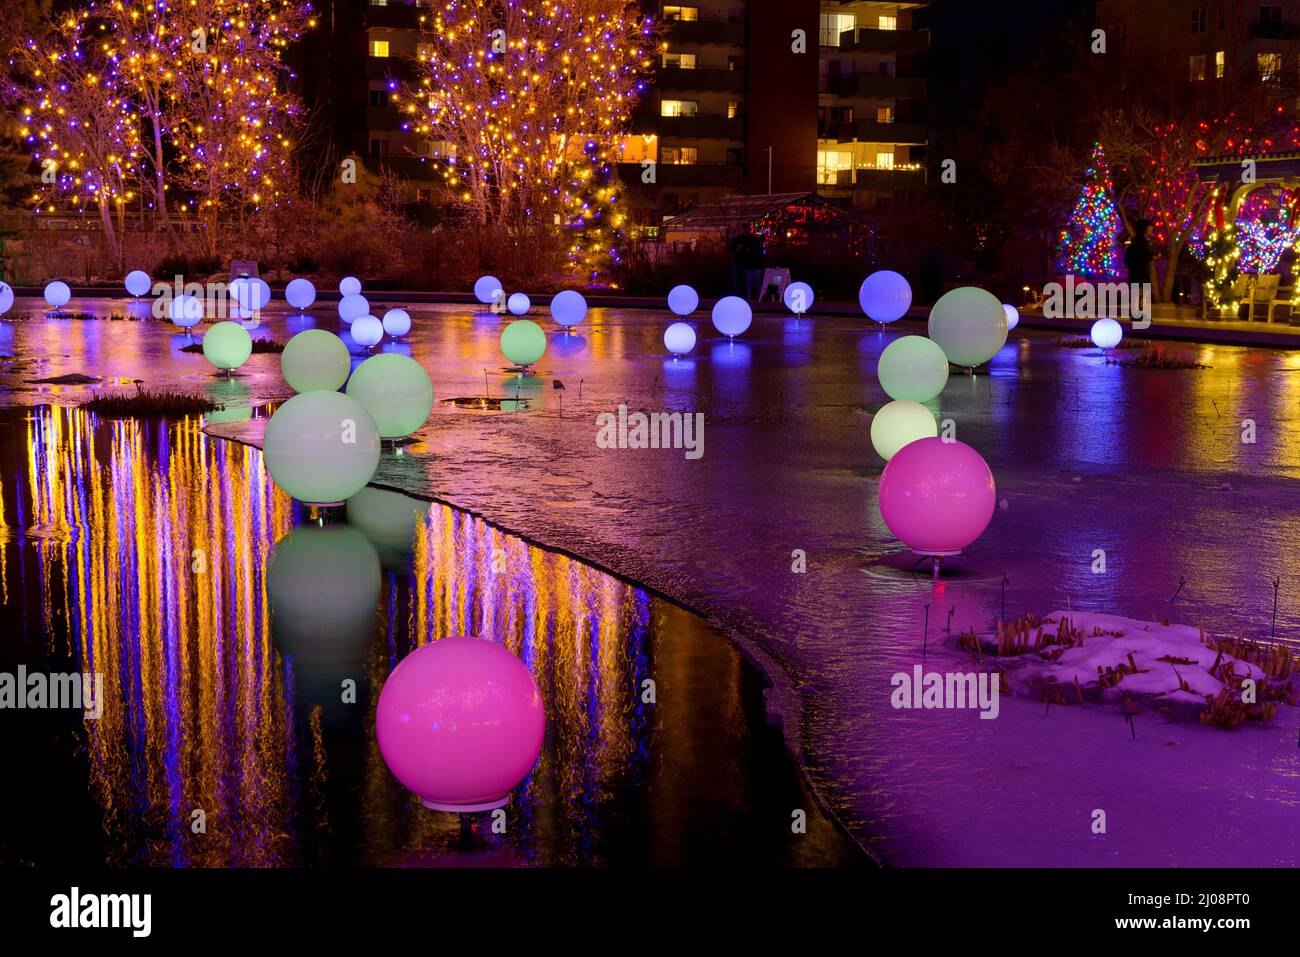 Lights in Pond - Wide-angle night view of colorful lights bright up a frozen pond in Denver Botanic Gardens during its holiday Blossoms of Light event. Stock Photo